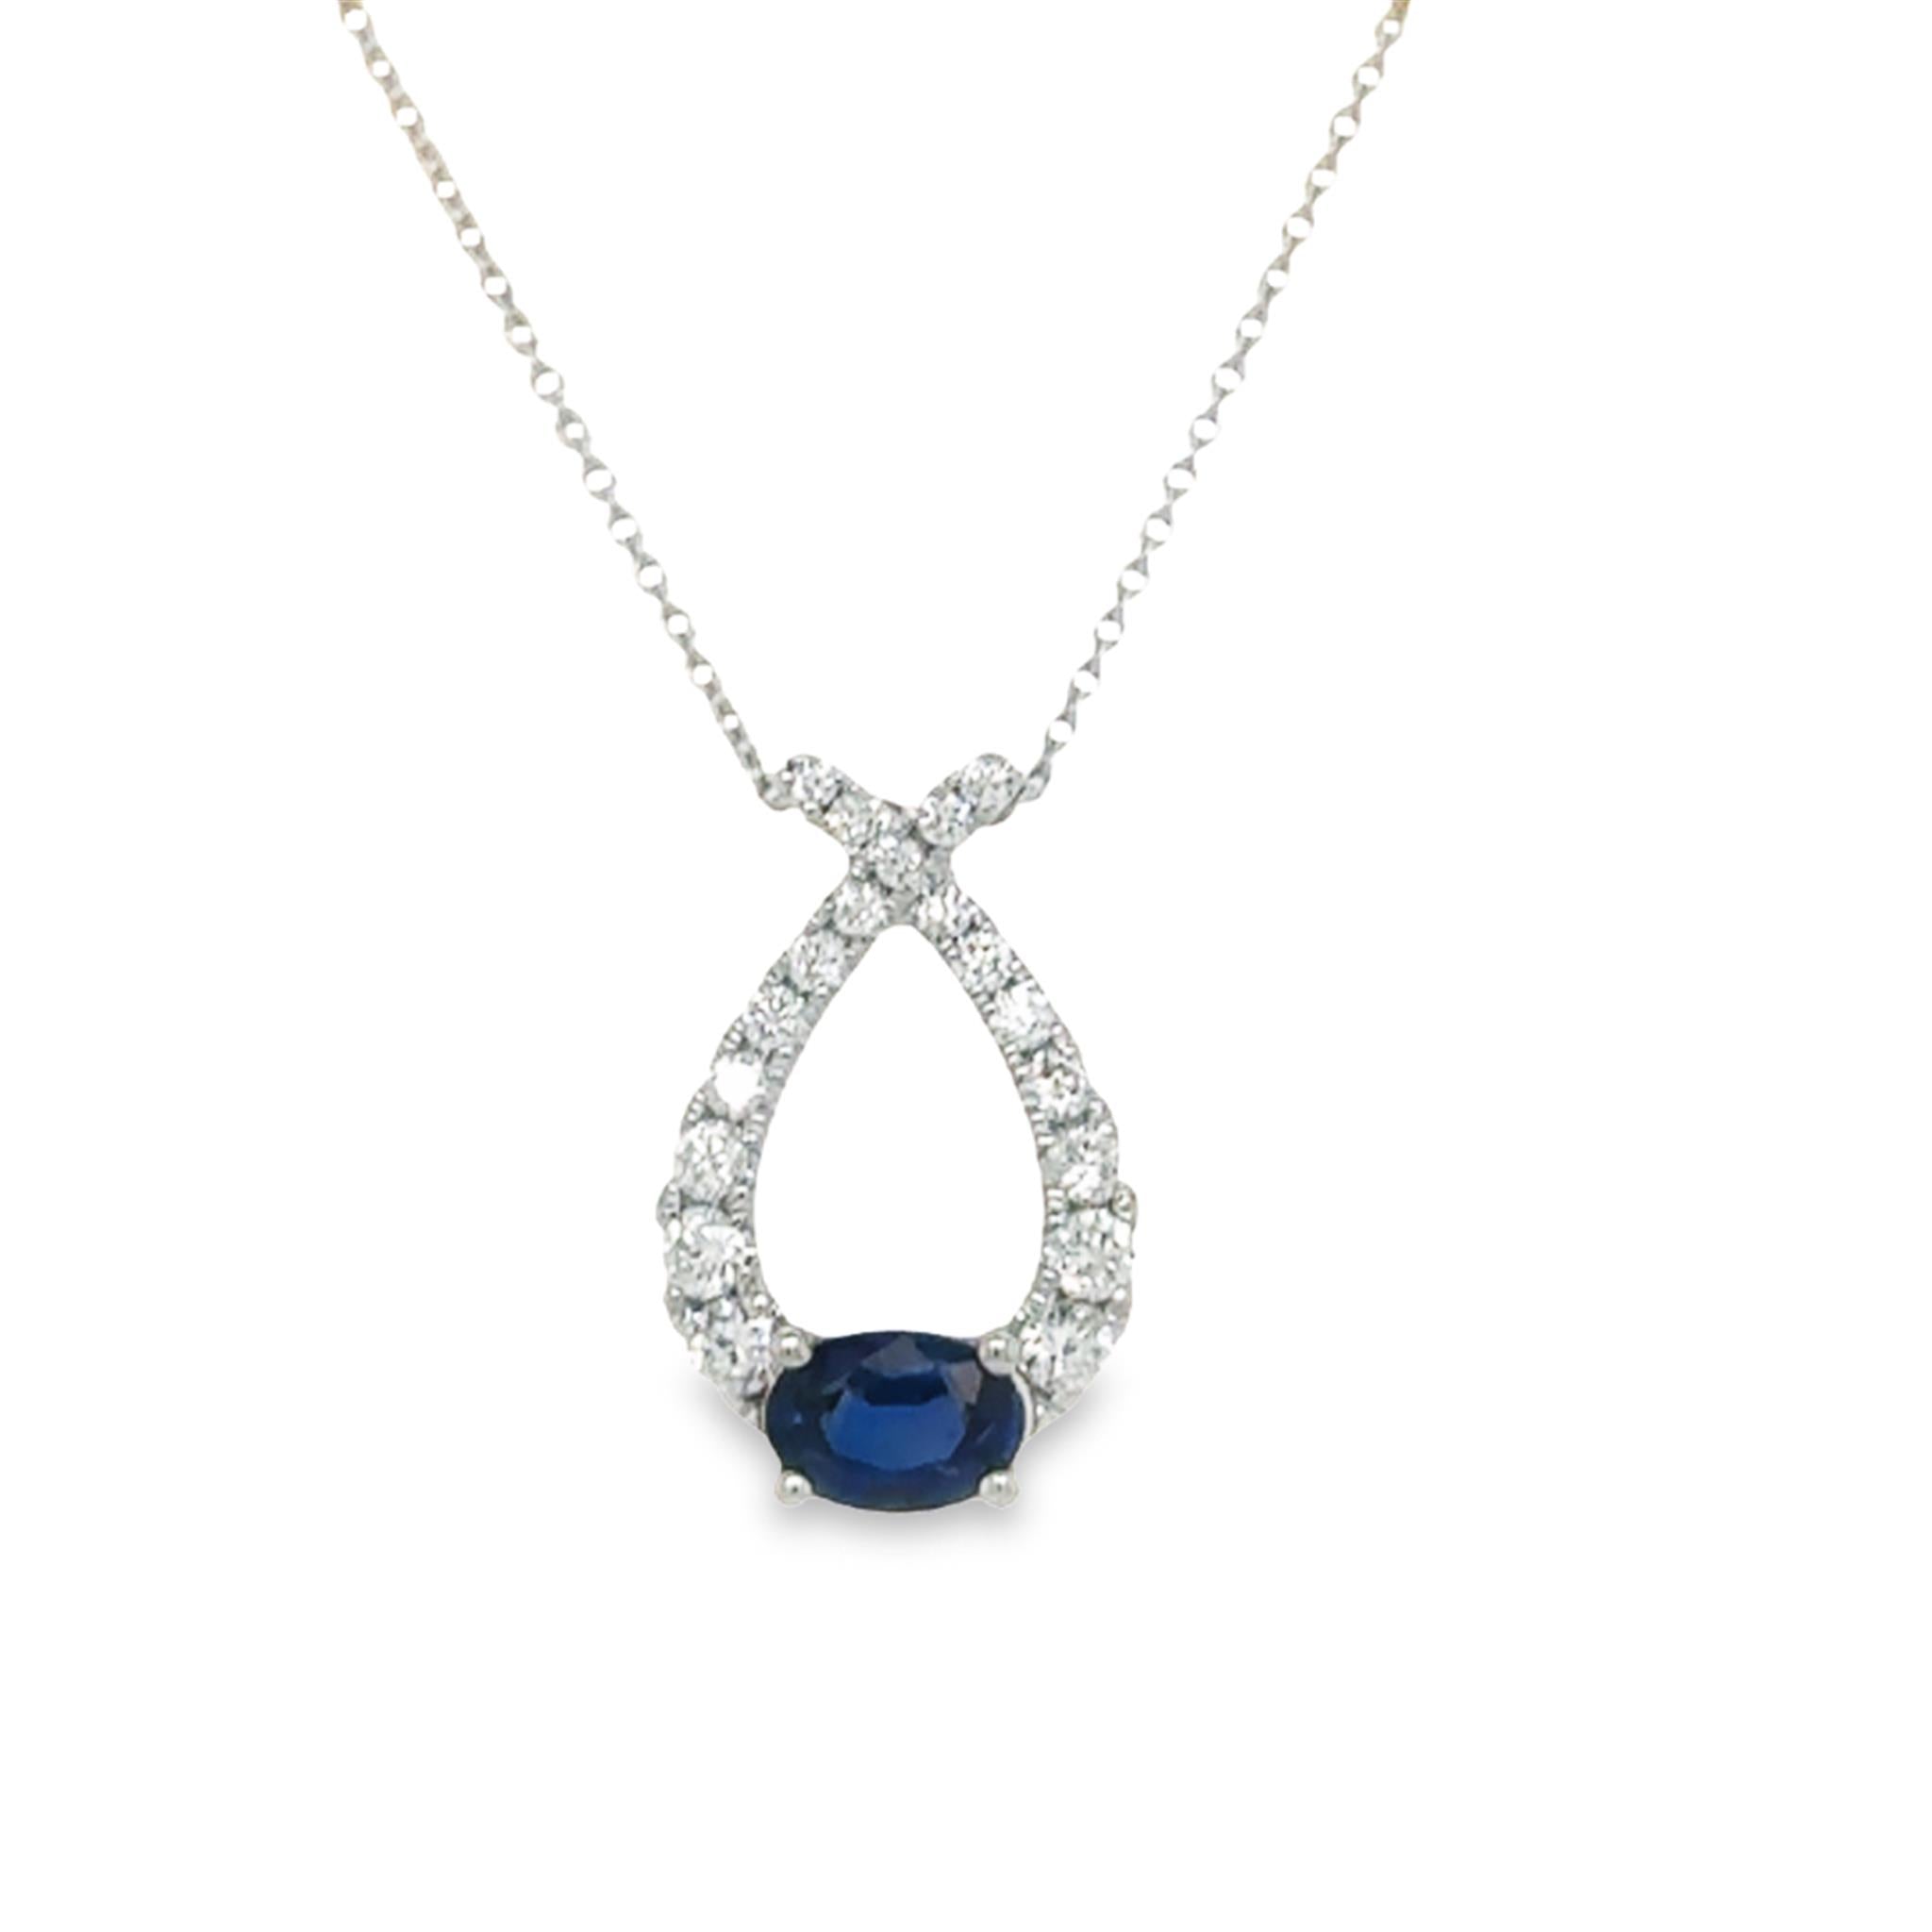 Bloomingdale's Blue Sapphire and Diamond Teardrop Pendant Necklace in 14K  White Gold, 17